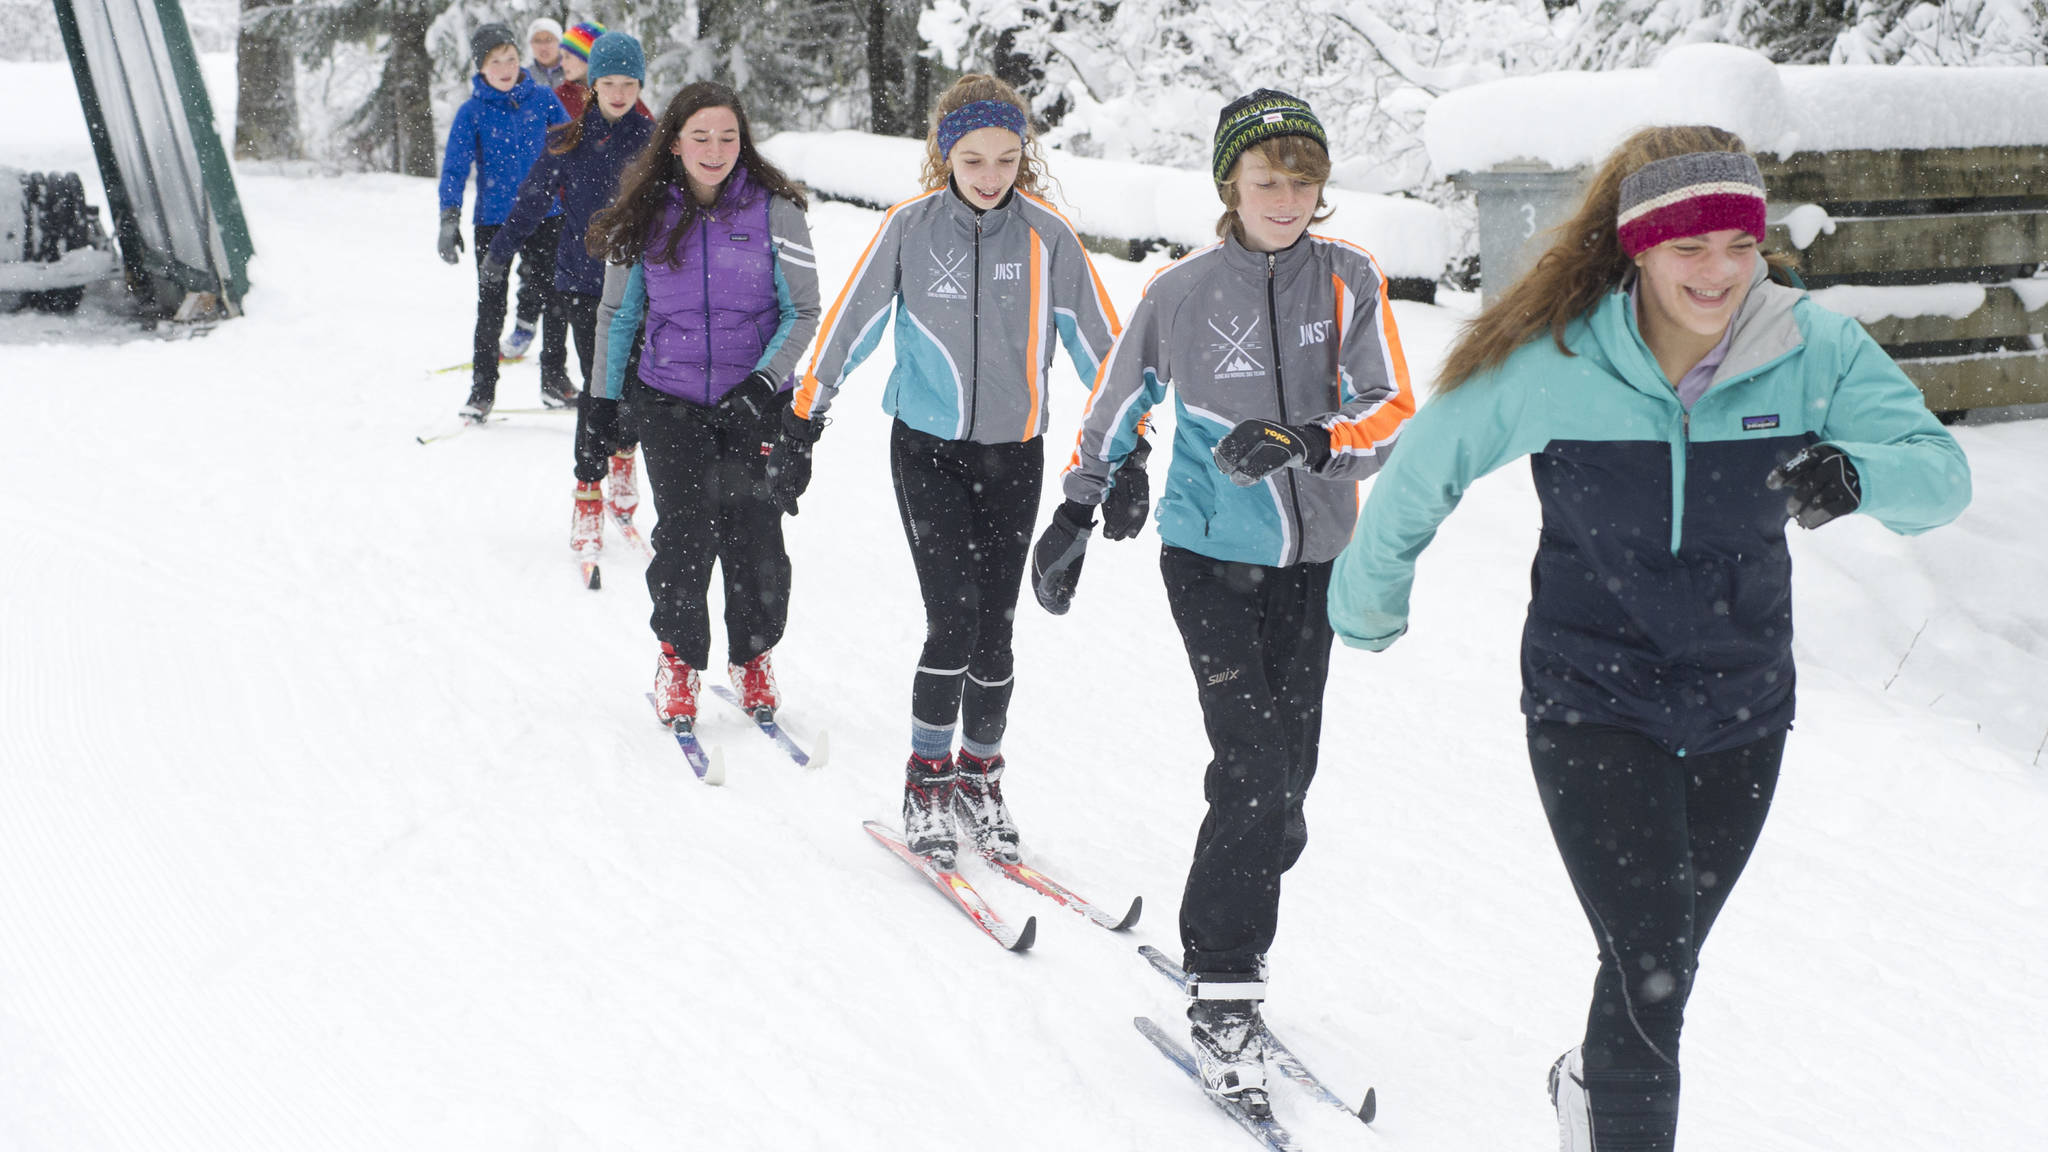 Juneau Nordic Ski Team members Erin Wallace, front, leads Aaron Blust and Anna Iverson in a pole-less skiing drill through fresh snow on Saturday, Nov. 18, 2017, at the Mendenhall Campgrounds. The JNST attended a Thanksgiving clinic in Anchorage Nov. 24-26 with teams from Nome and Unalakleet and led by two-time Olympian Lars Flora. (Nolin Ainsworth | Juneau Empire)